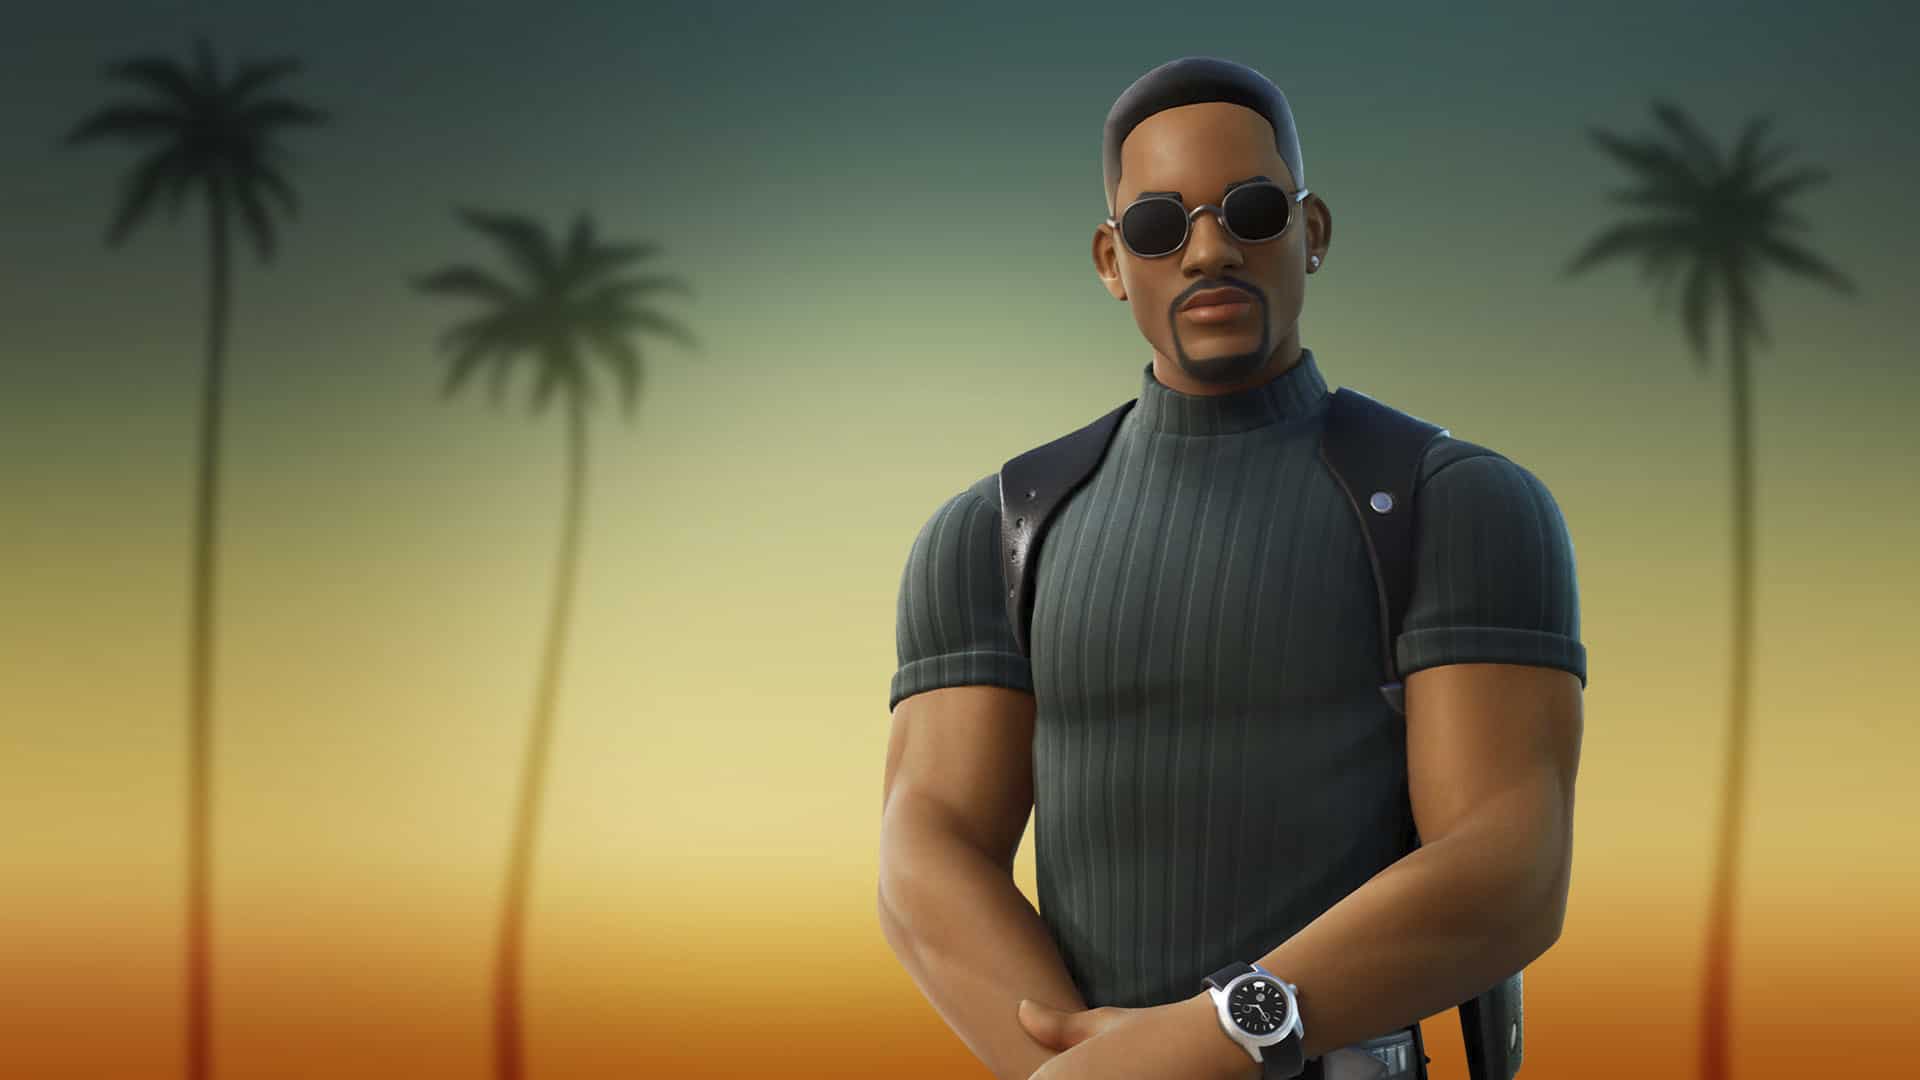 Fortnite ajoute le personnage des Bad Boys de Will Smith, Mike Lowrey